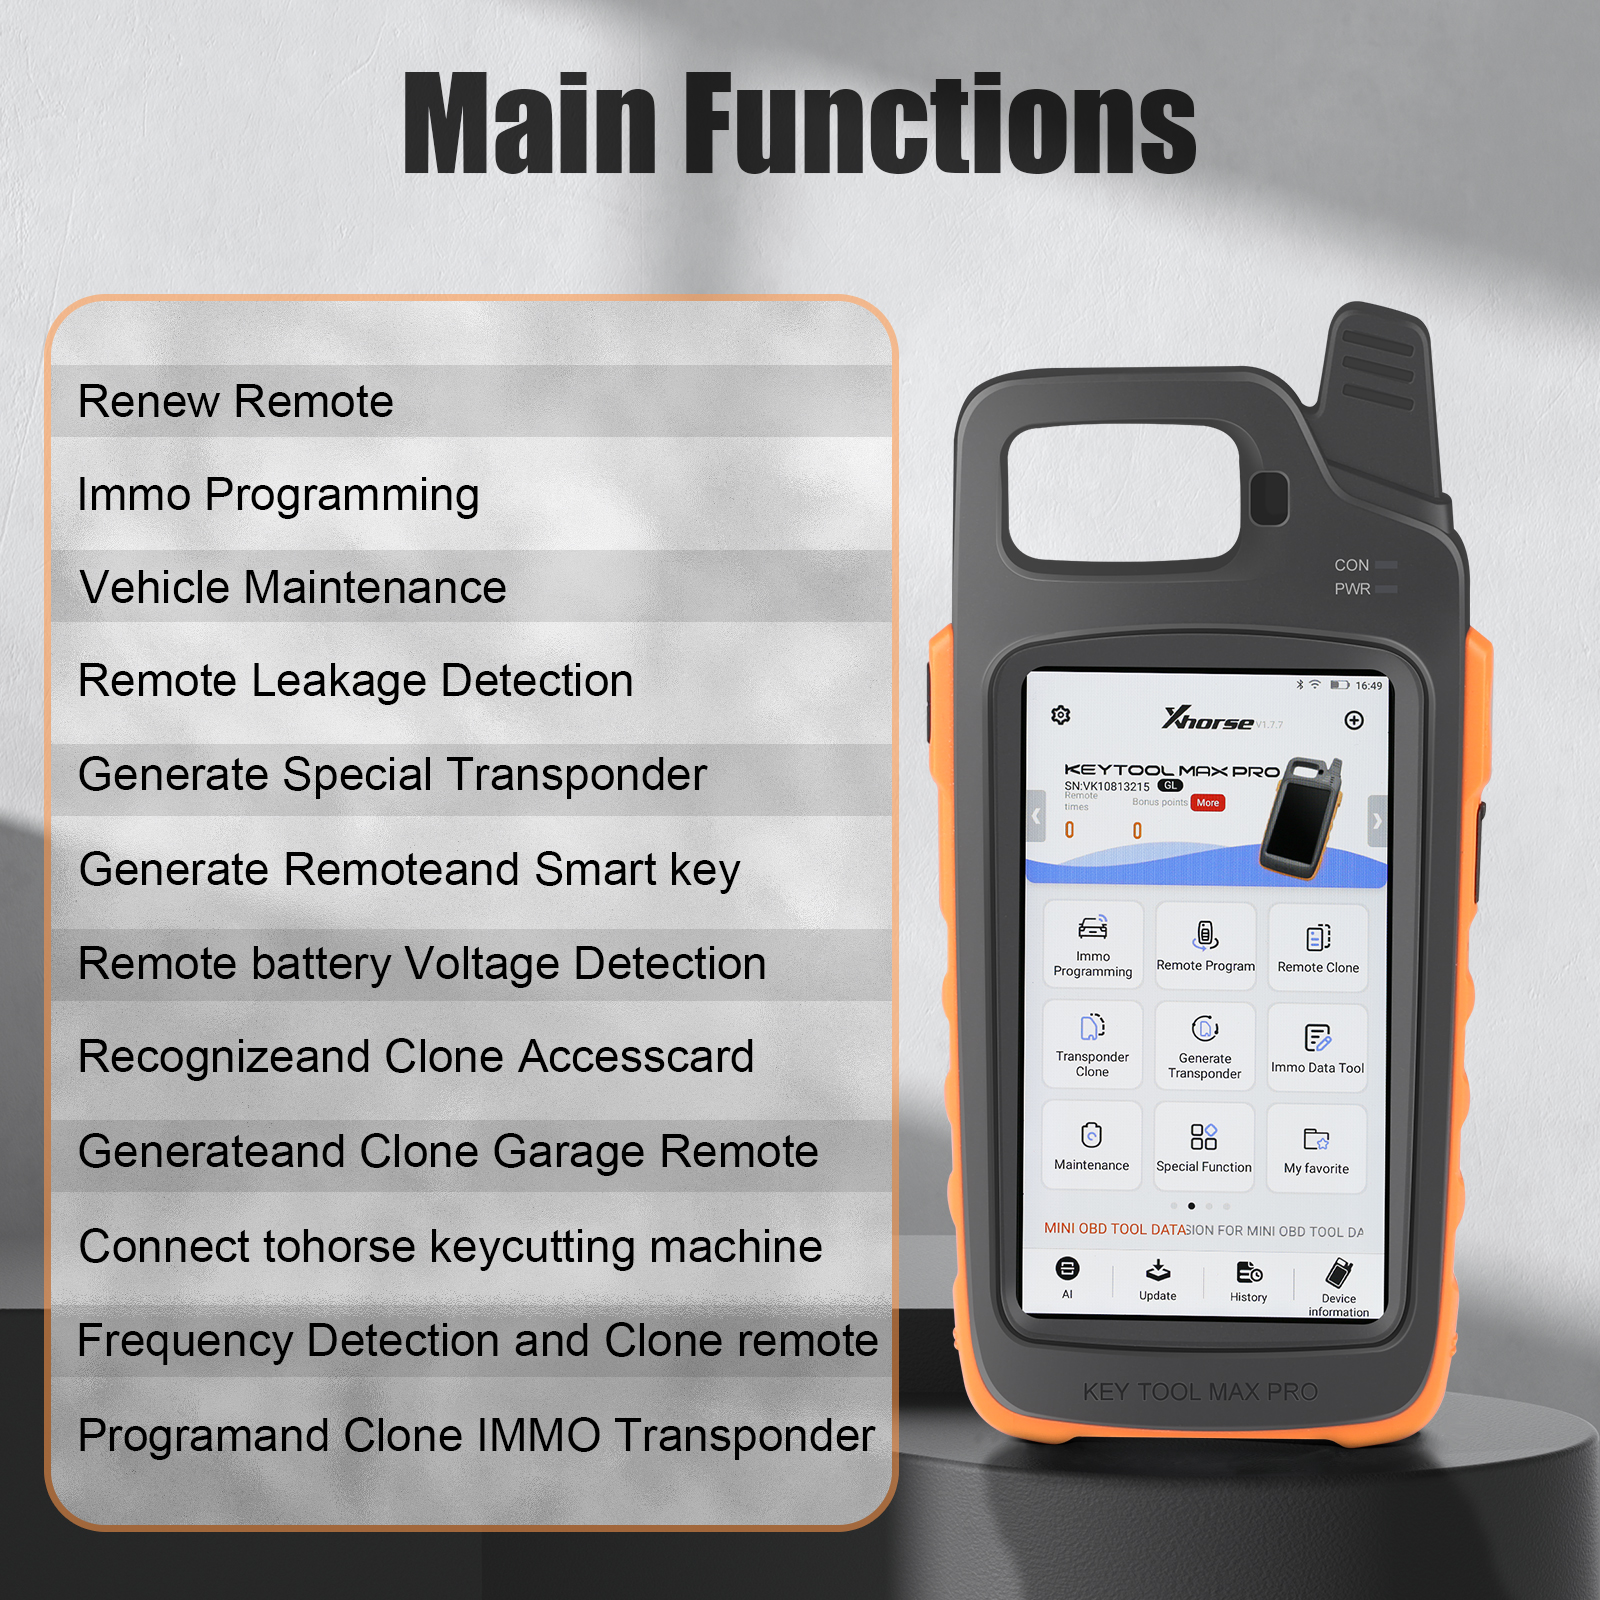 2022 Newest Xhorse VVDI Key Tool Max Pro With MINI OBD Tool Function Support Read Voltage and Leakage Current